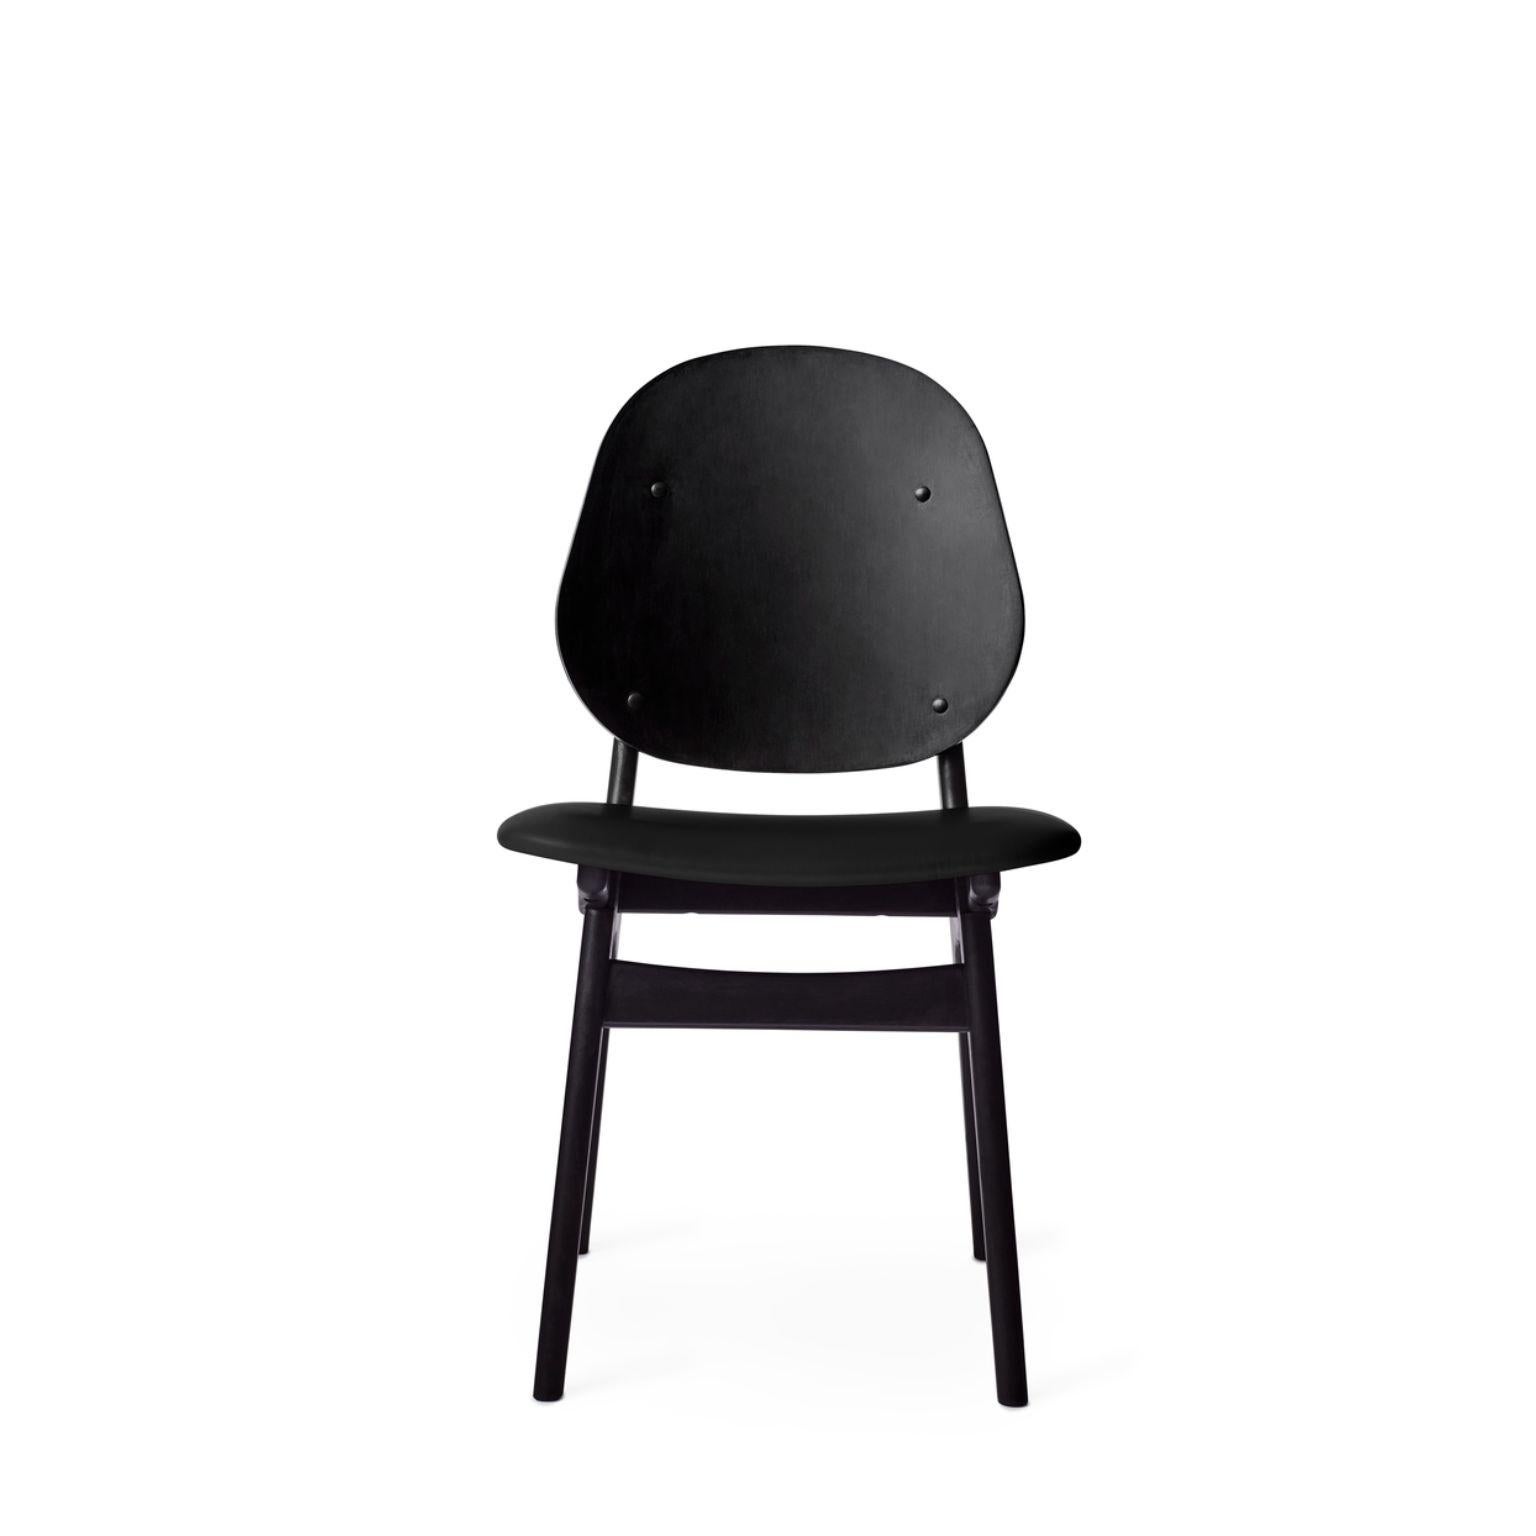 Noble chair Black Lacquered Beech Black by Warm Nordic
Dimensions: D55 x W47 x H 85 cm
Material: Black lacquered solid beech, Veneer seat and back, Textile or leather upholstery.
Weight: 7.5 kg
Also available in different colors and